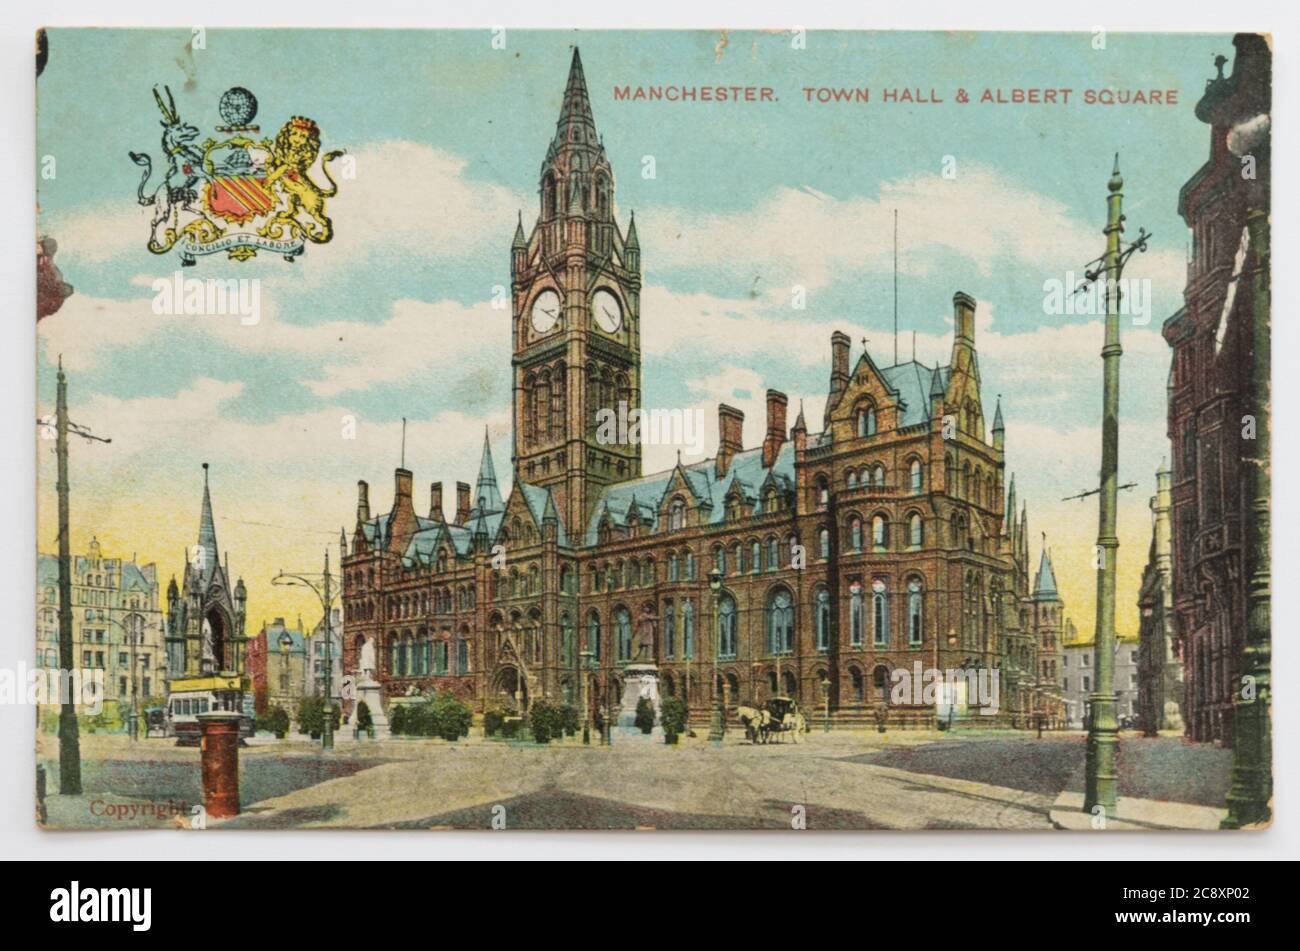 Manchester Town Hall and Albert Square vintage postcard from 1900-1910s Stock Photo